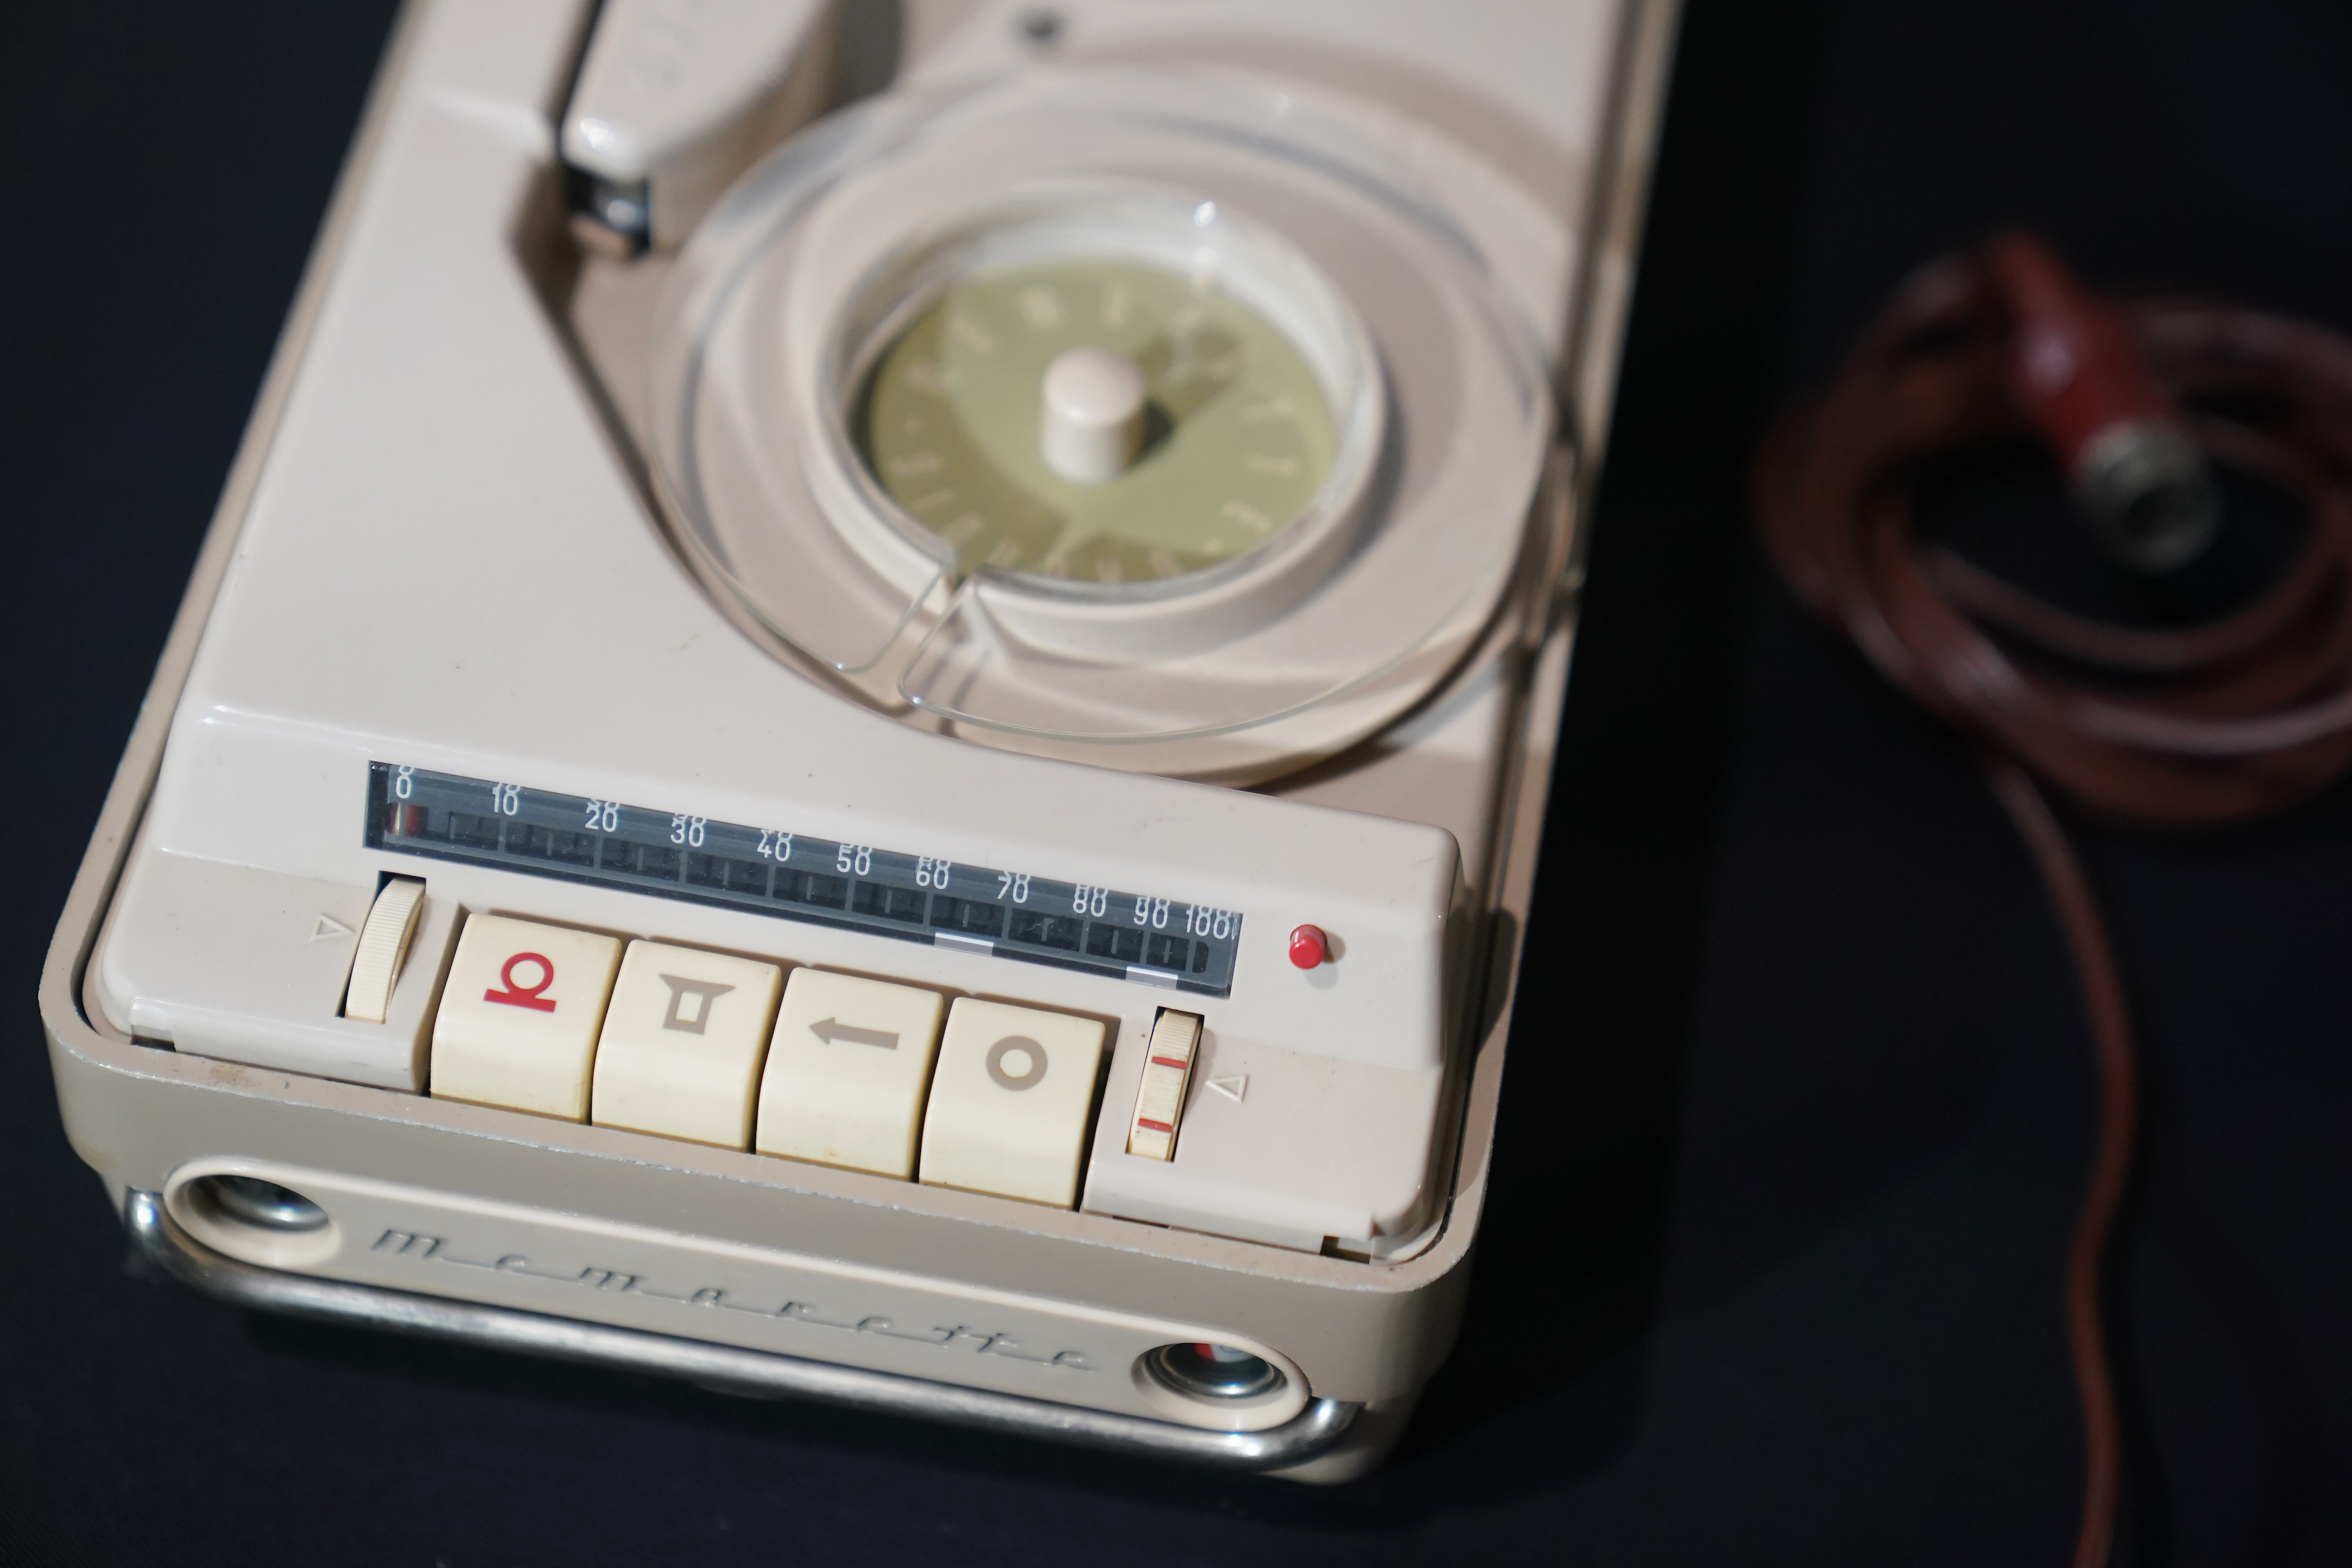 Agatha Christie's 1959 Grundig Memorette portable dictating machine and microphone during a preview of Murder by the Book: A Celebration of 20th Century Crime Fiction, a British crime writing exhibition at Cambridge University Library, which opens to the public on Saturday. (Joe Giddens/ PA)